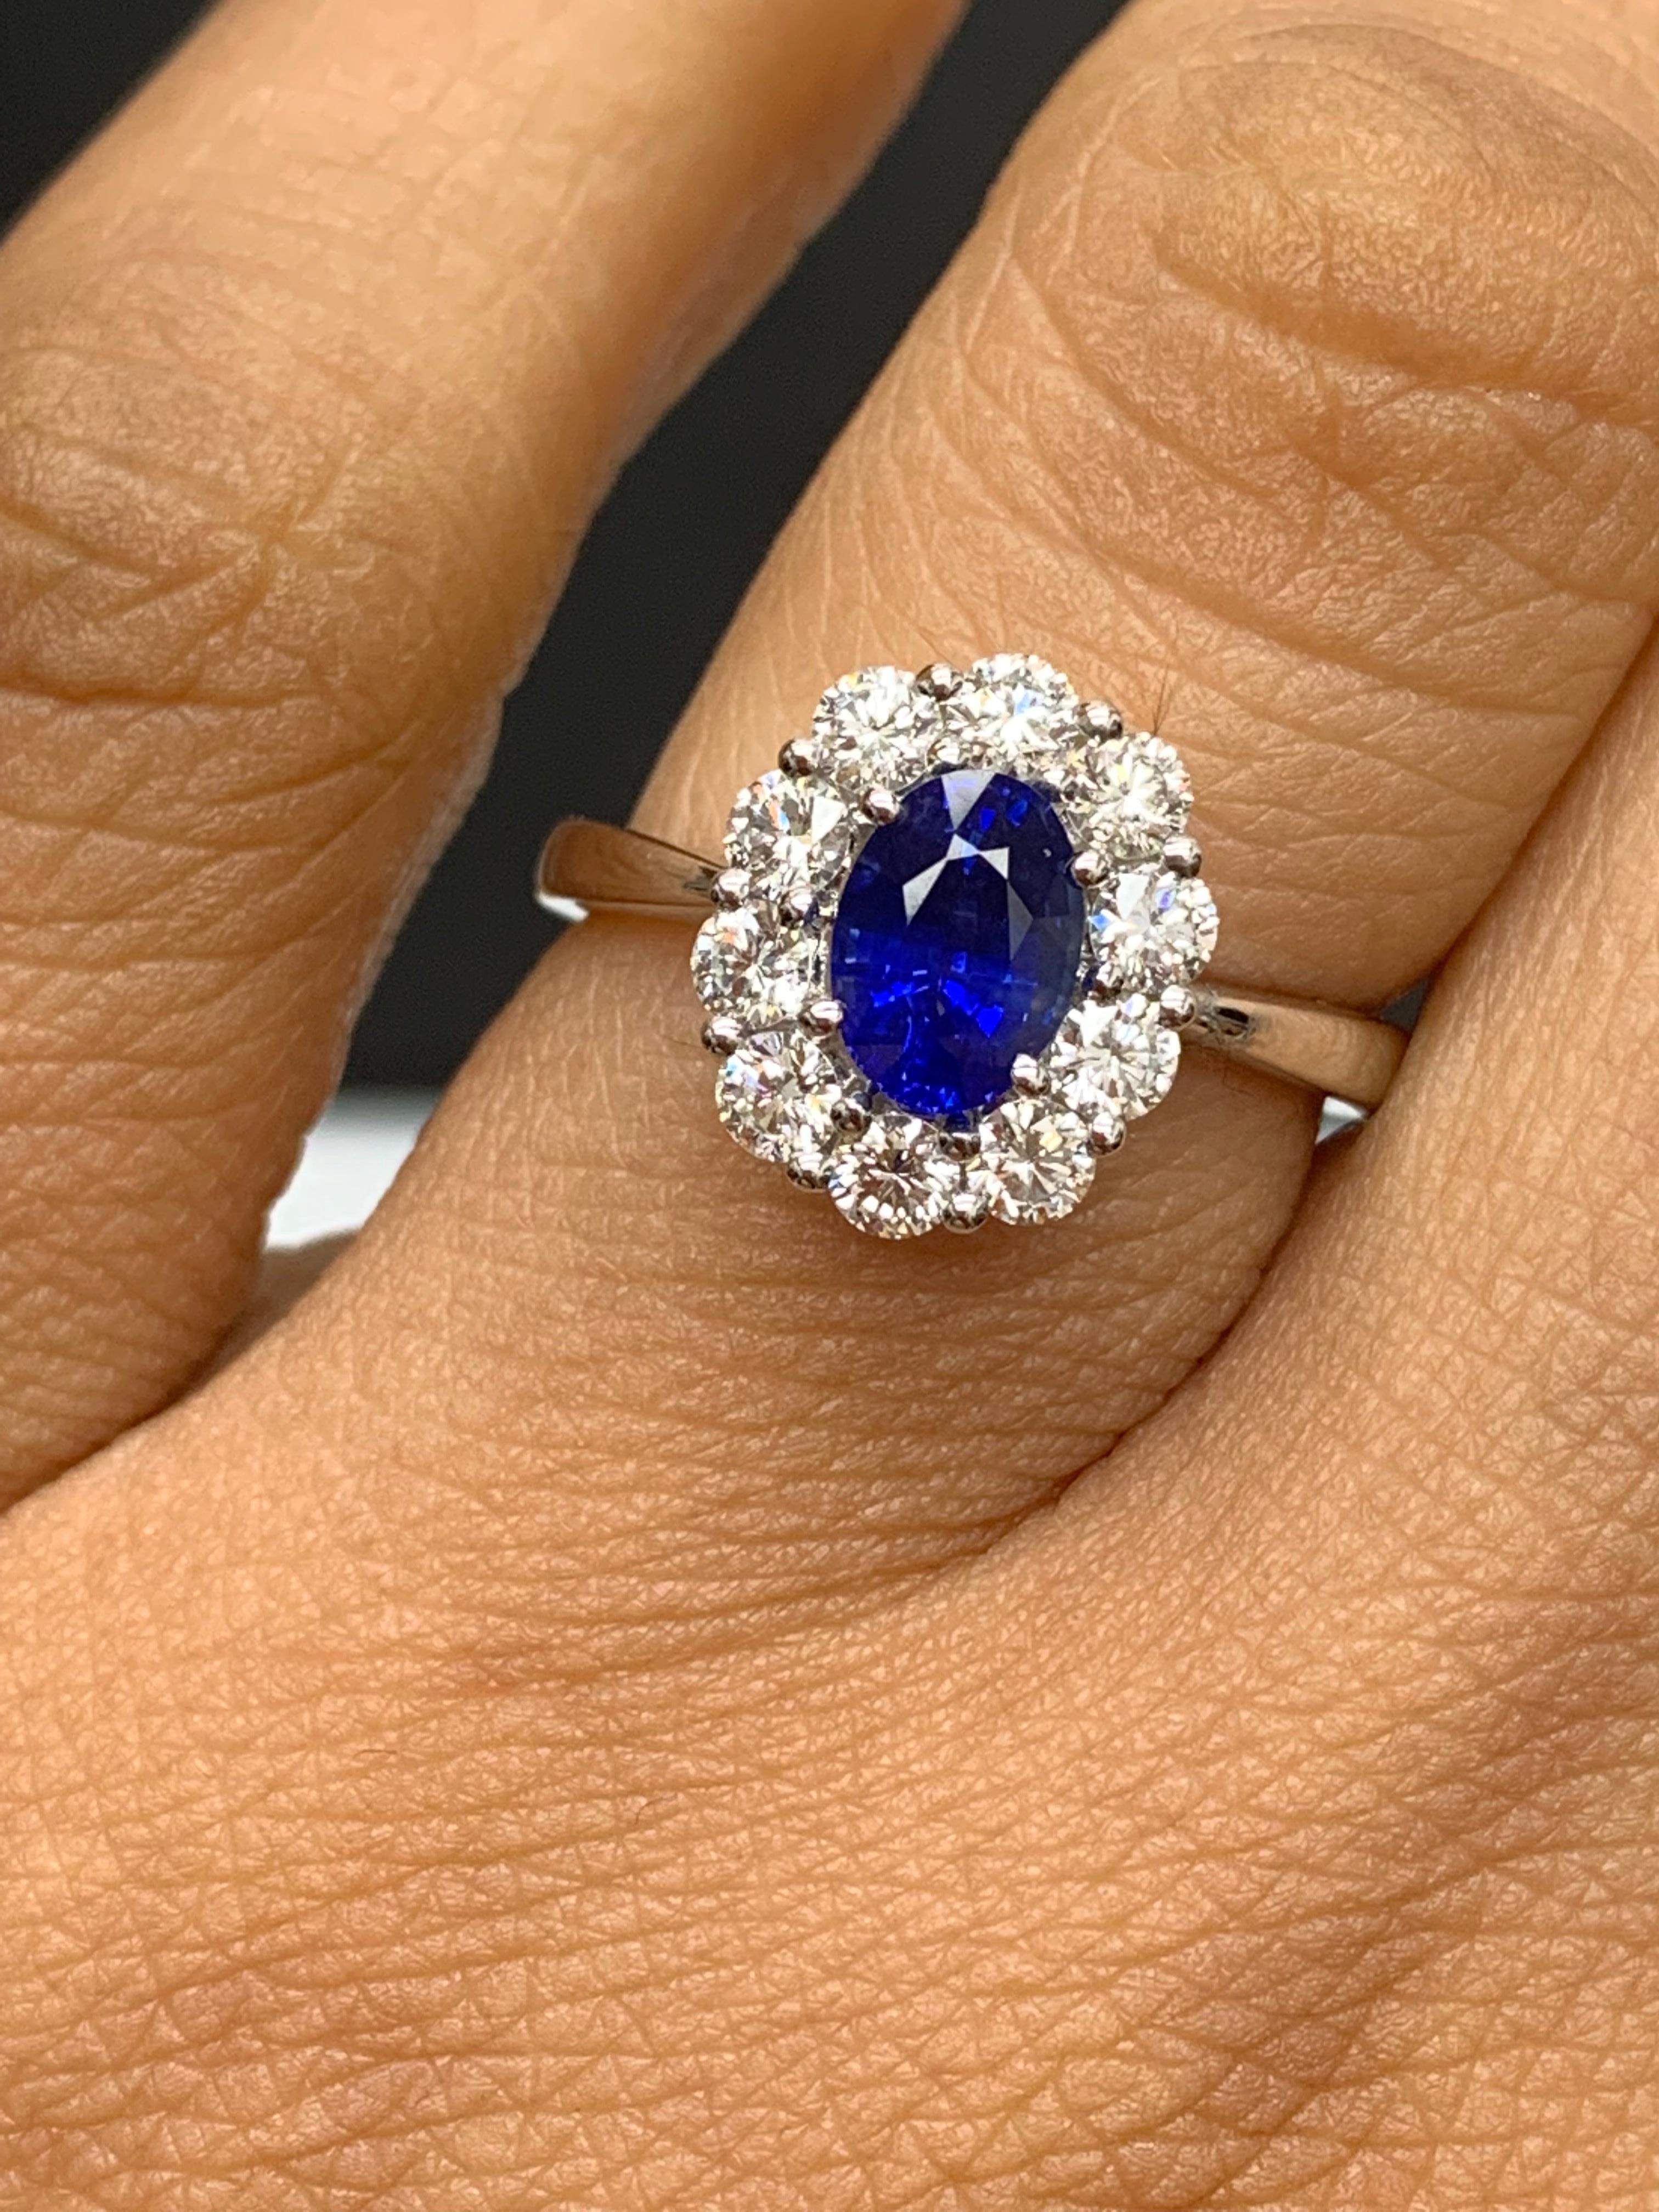 0.91 Carat Oval Cut Blue Sapphire and Diamond Ring in 18k White Gold For Sale 5